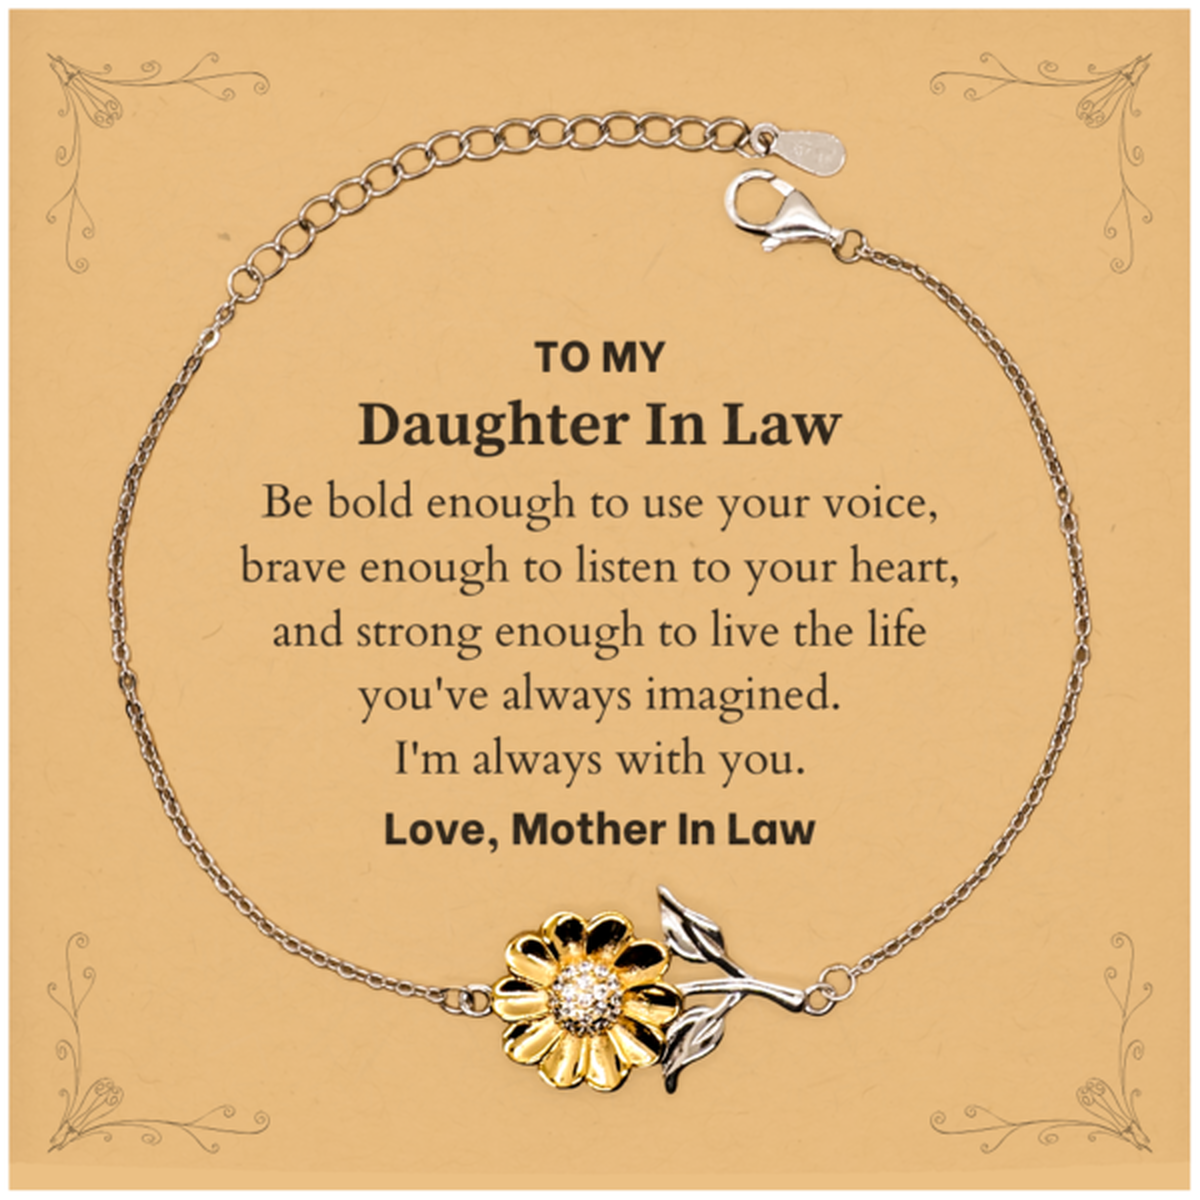 Keepsake Daughter In Law Sunflower Bracelet Gift Idea Graduation Christmas Birthday Daughter In Law from Mother In Law, Daughter In Law Be bold enough to use your voice, brave enough to listen to your heart. Love, Mother In Law